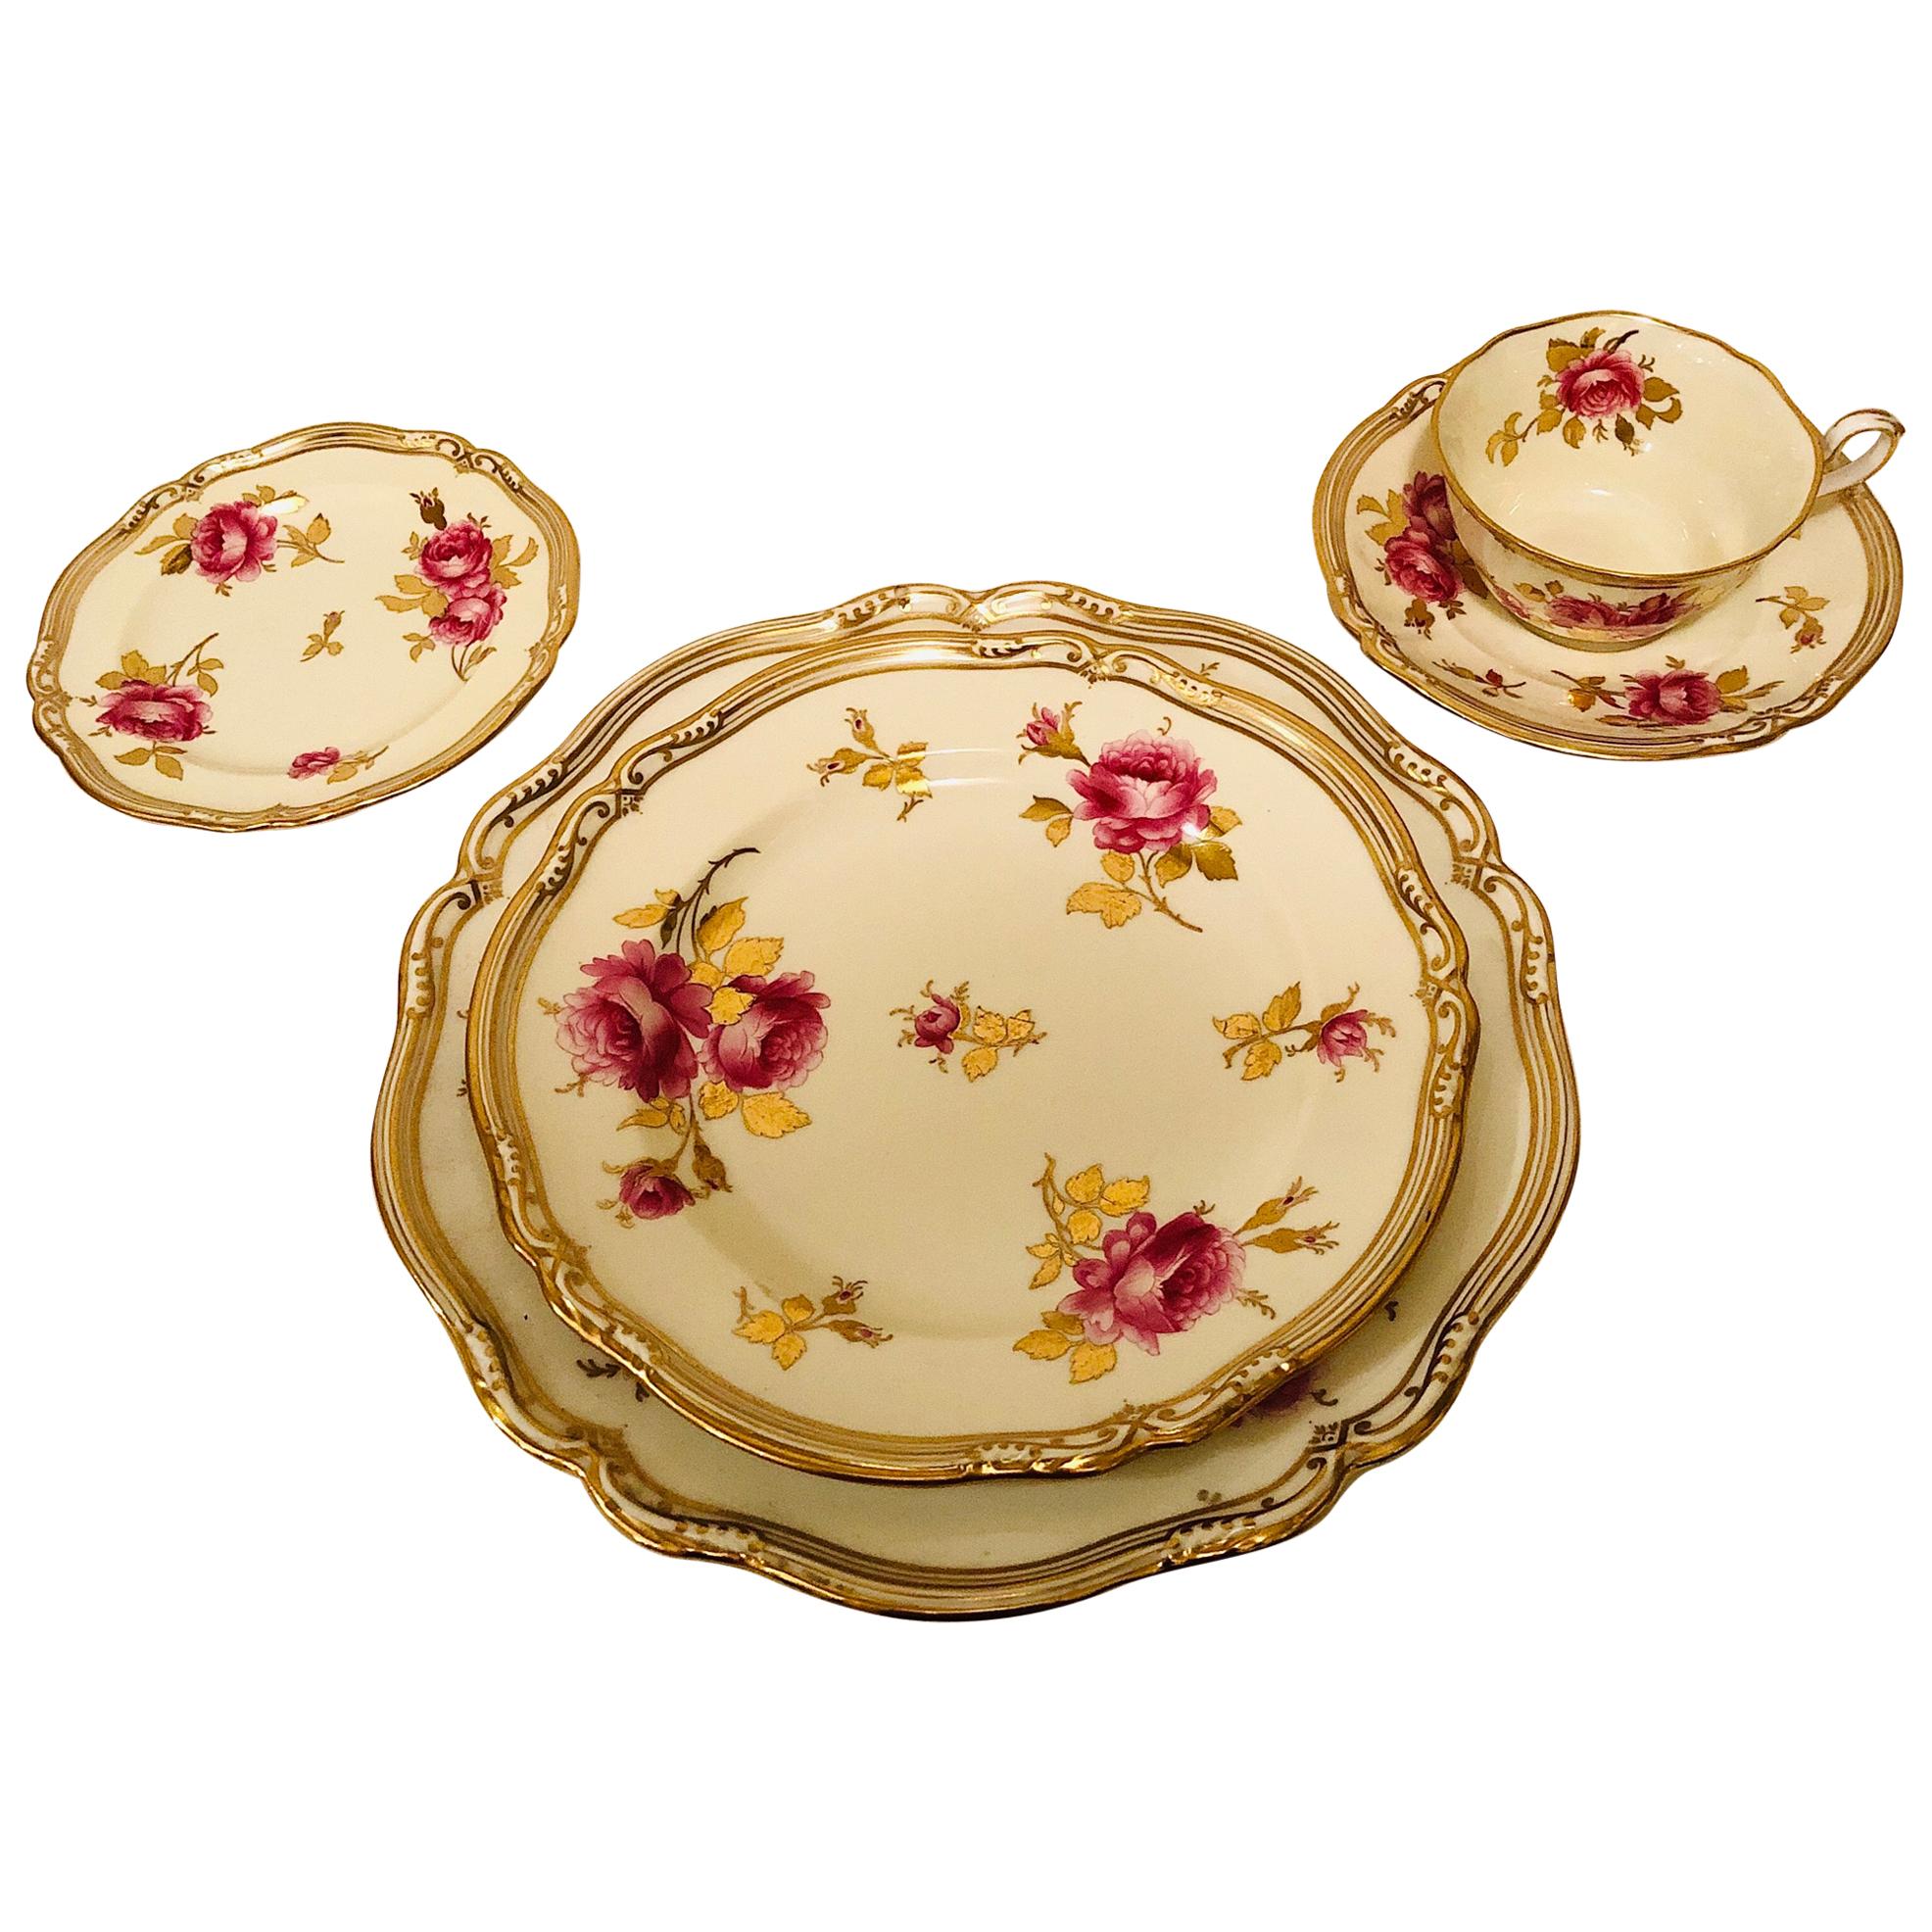 We want to offer you this Spode made exclusively for Tiffany & Co 66 piece dinner service painted with pink vibrant roses. This set is in great condition, as it looks like it had hardly been used. This dinner service includes 14 dinner plates-10.75